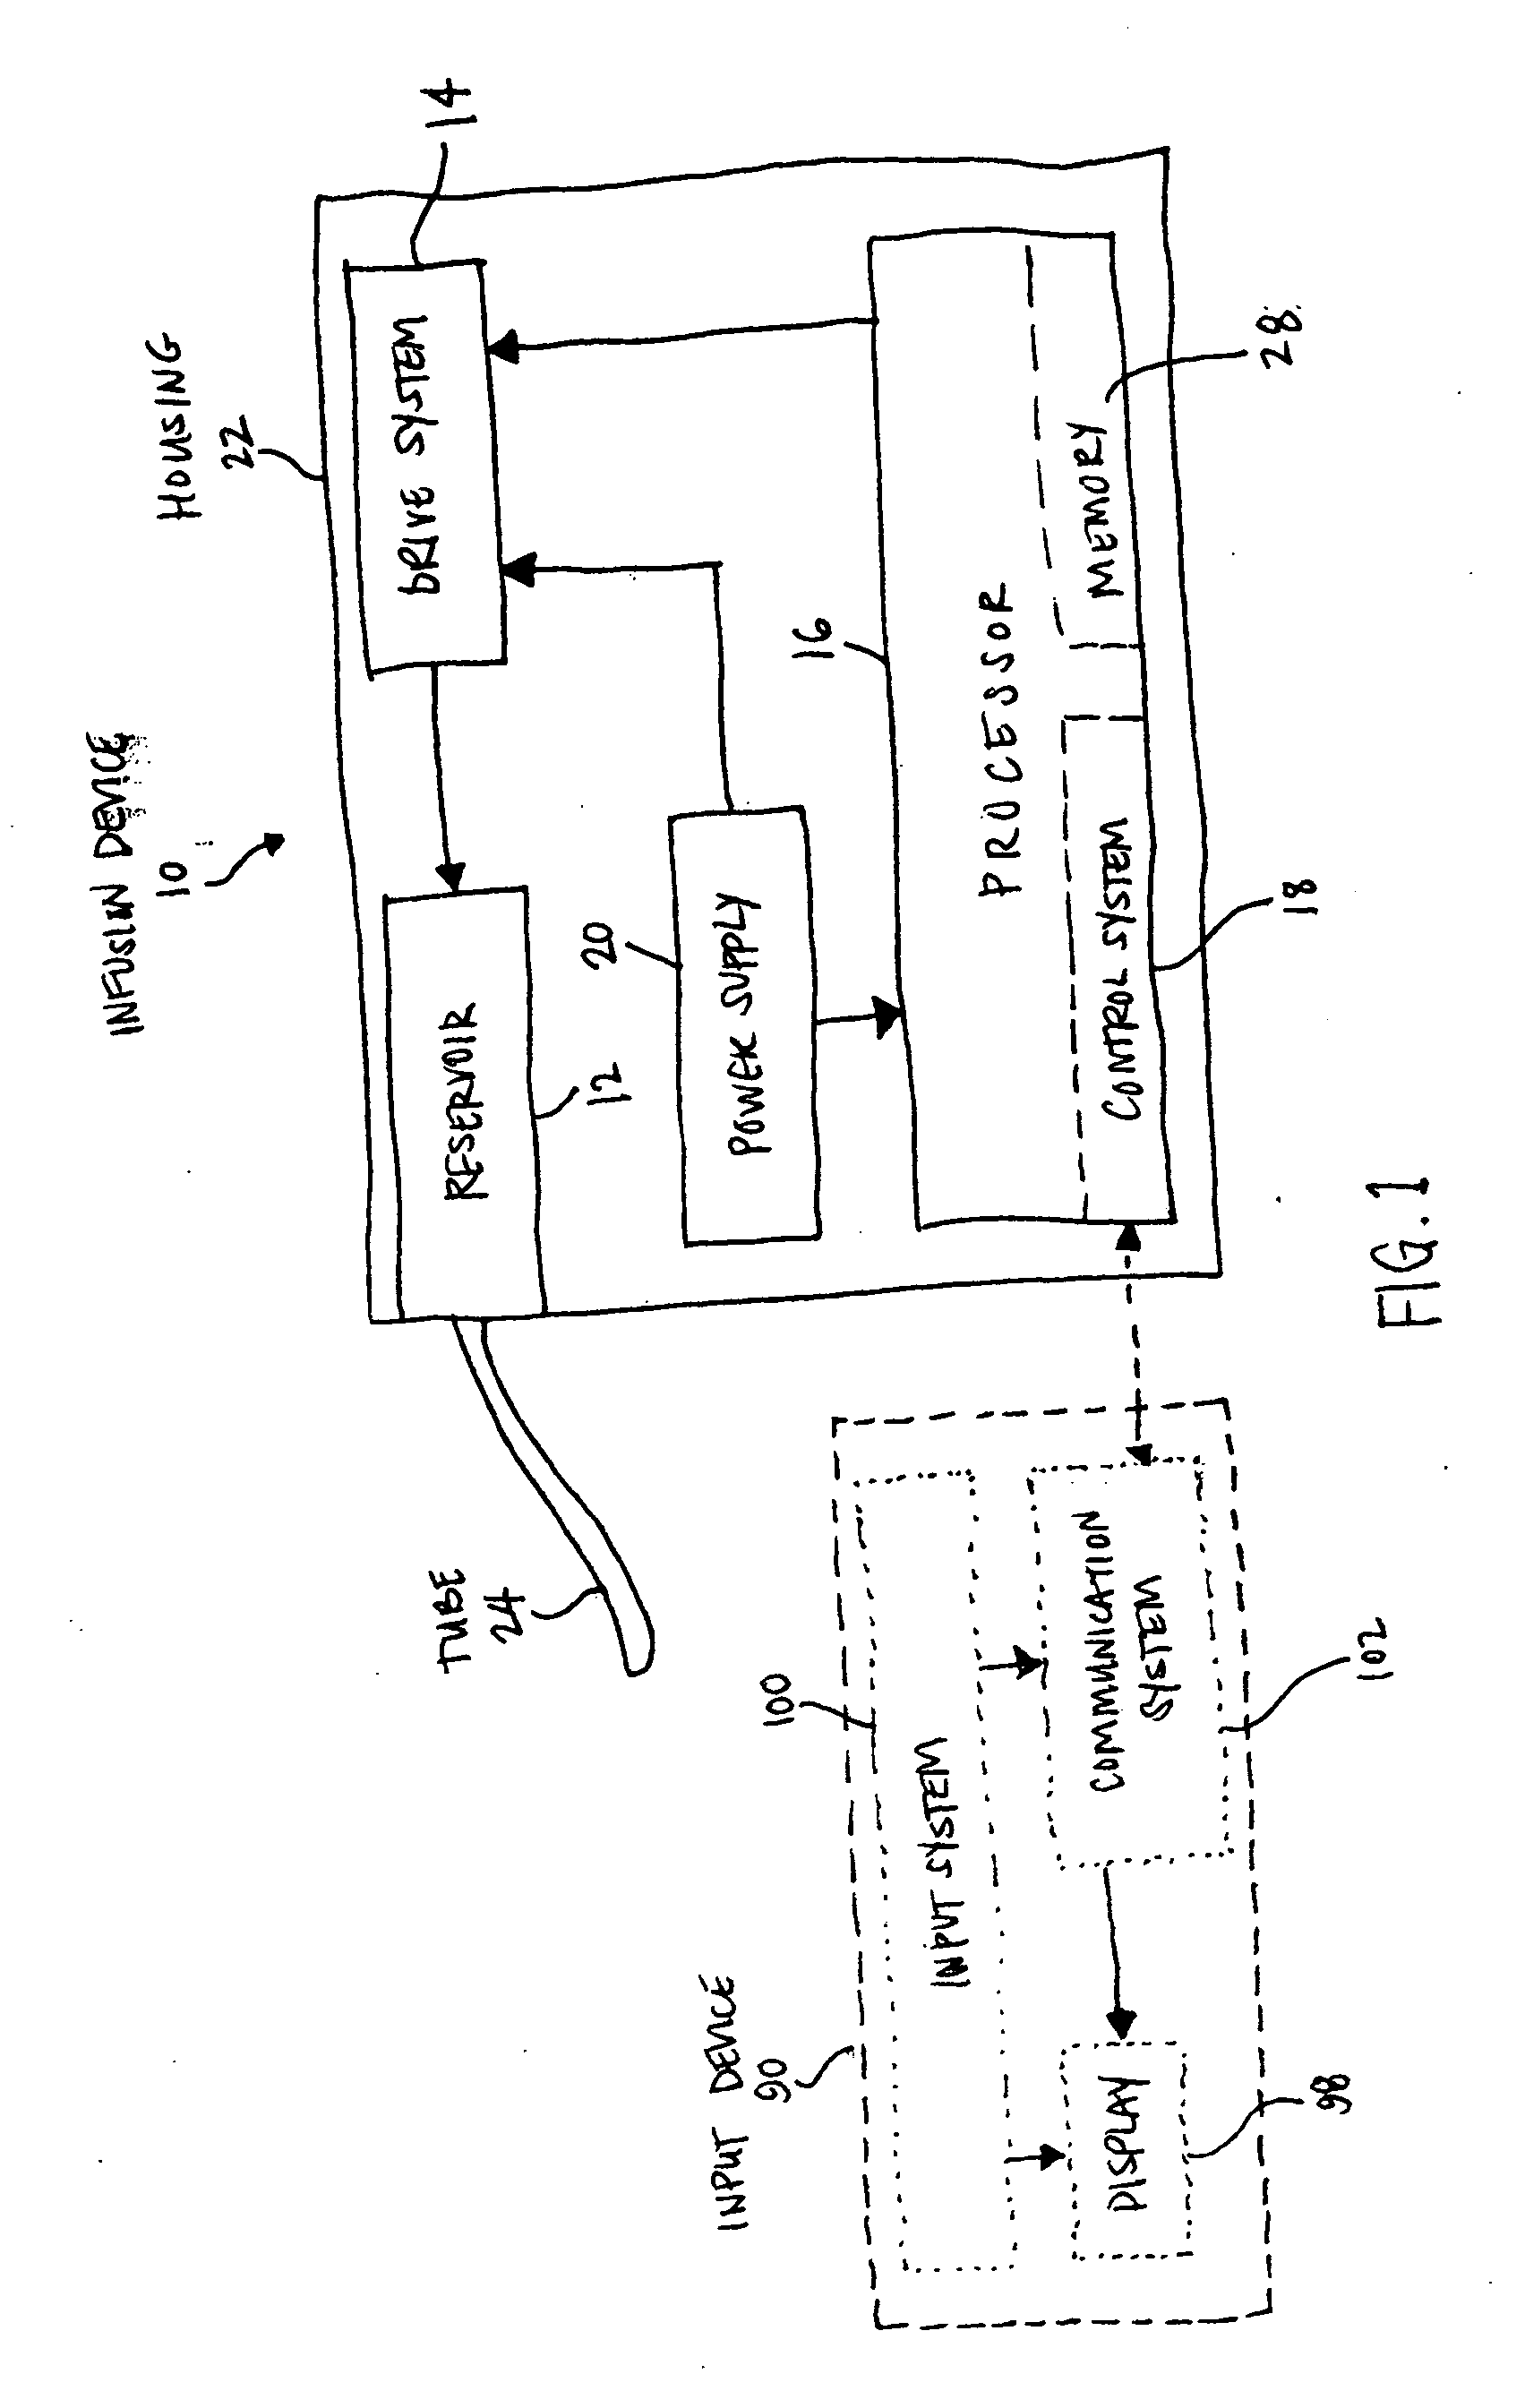 Systems and methods for entering temporary basal rate pattern in an infusion device